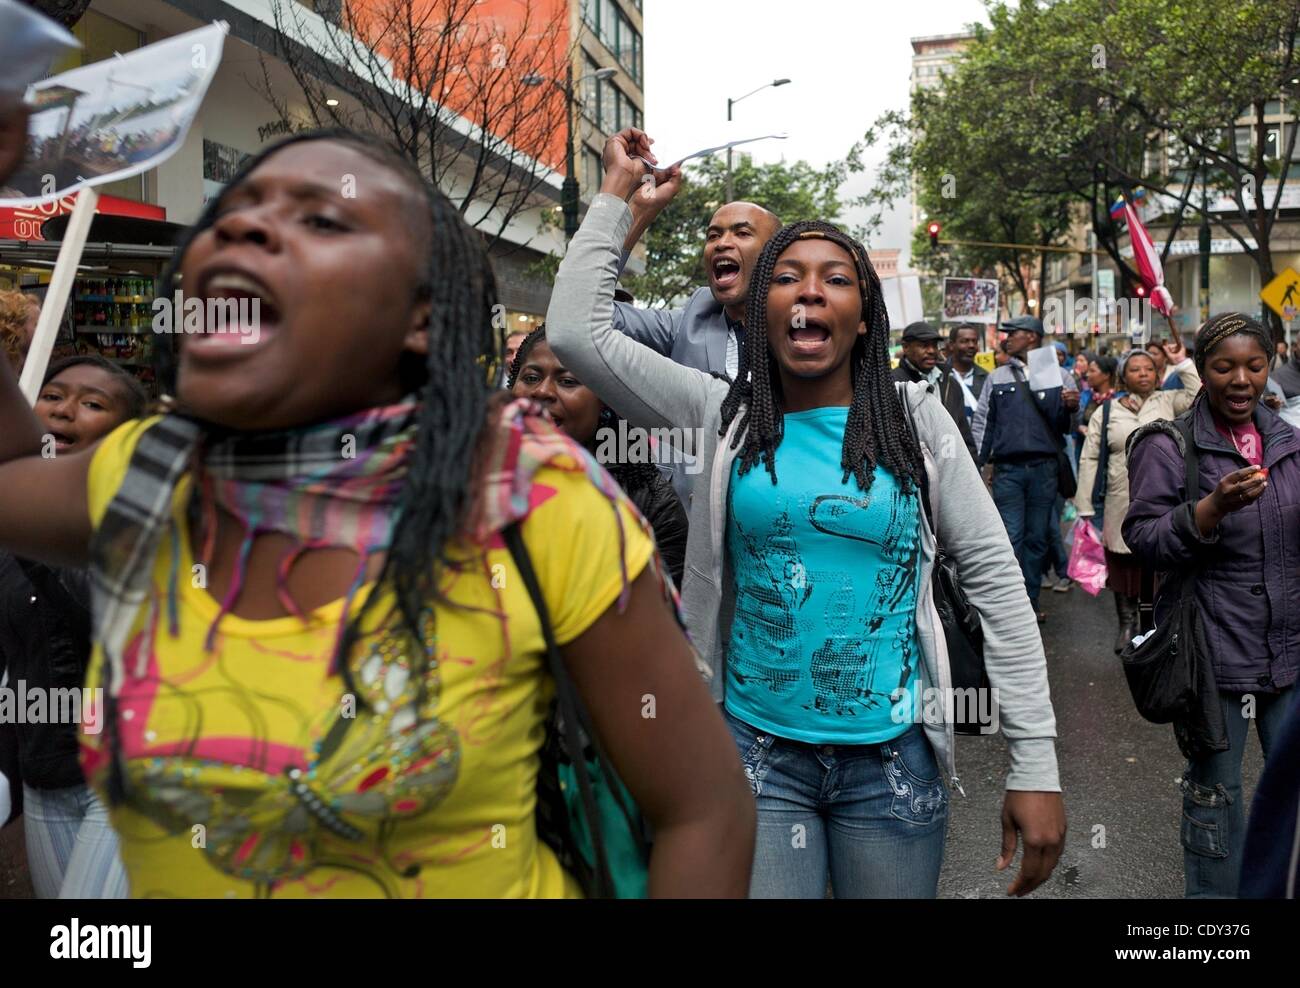 Oct. 12, 2011 - Bogota, Colombia - Afro-Colombians march in protest against the Free Trade Agreement with the U.S., which was approved by Congress late Wednesday. The National Association for Internally Displaced Afro-Colombians (AFRODES) organized the march. AFRODES opposes the FTA because it belie Stock Photo